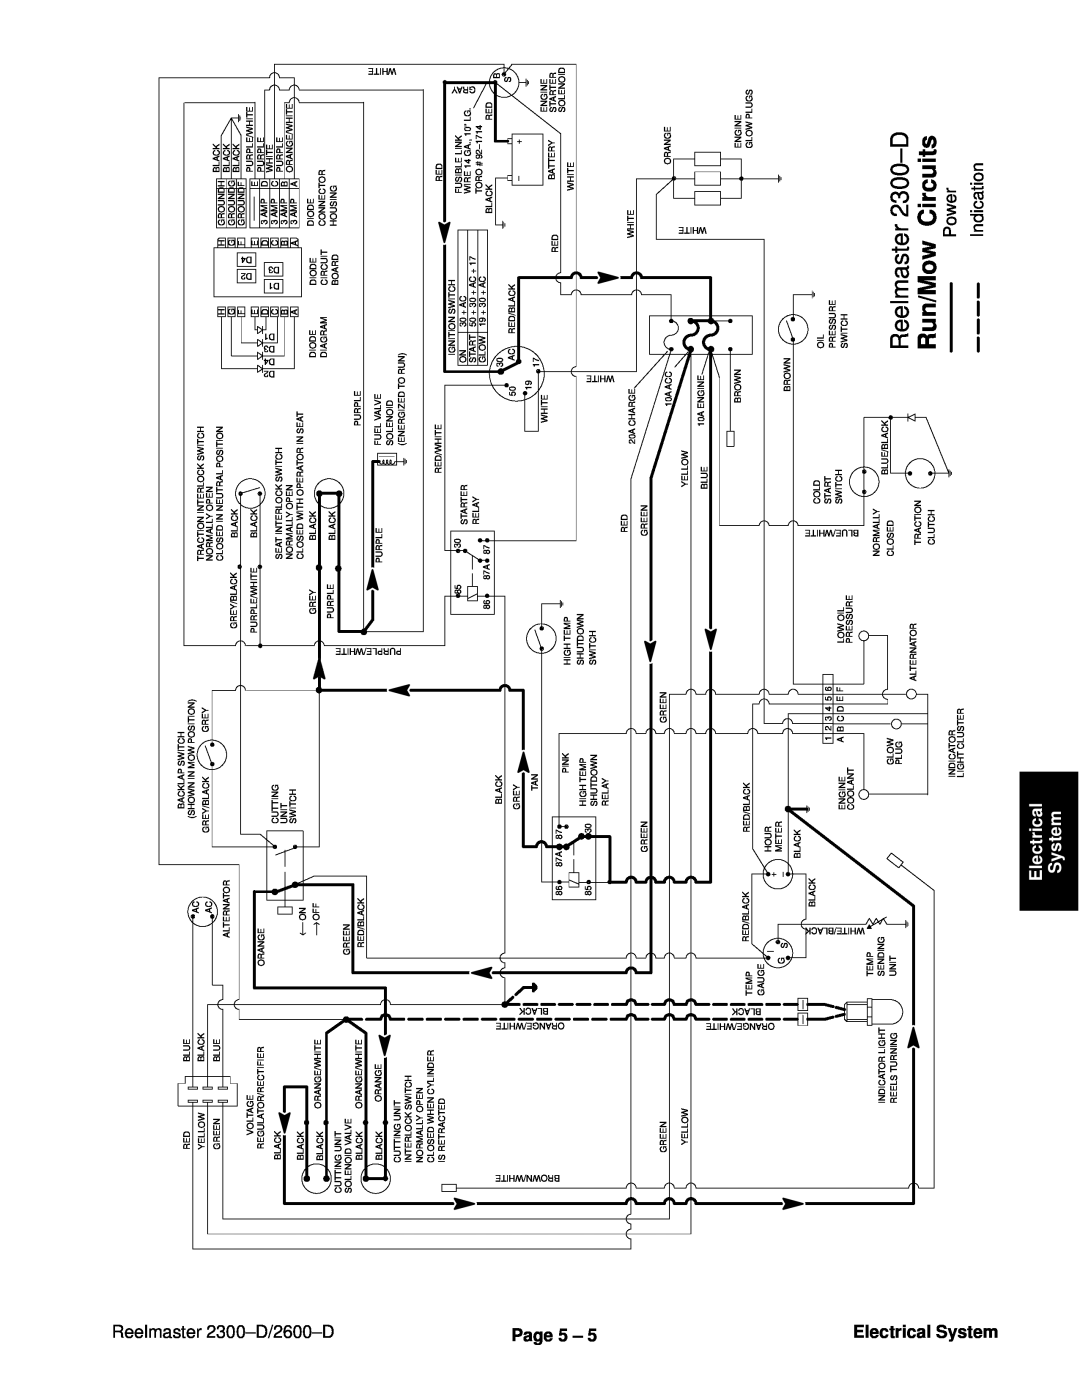 Toro 2600D, 2300-D service manual Reelmaster 2300±D, Page 5 ± Electrical System, Run/Mow Circuits 